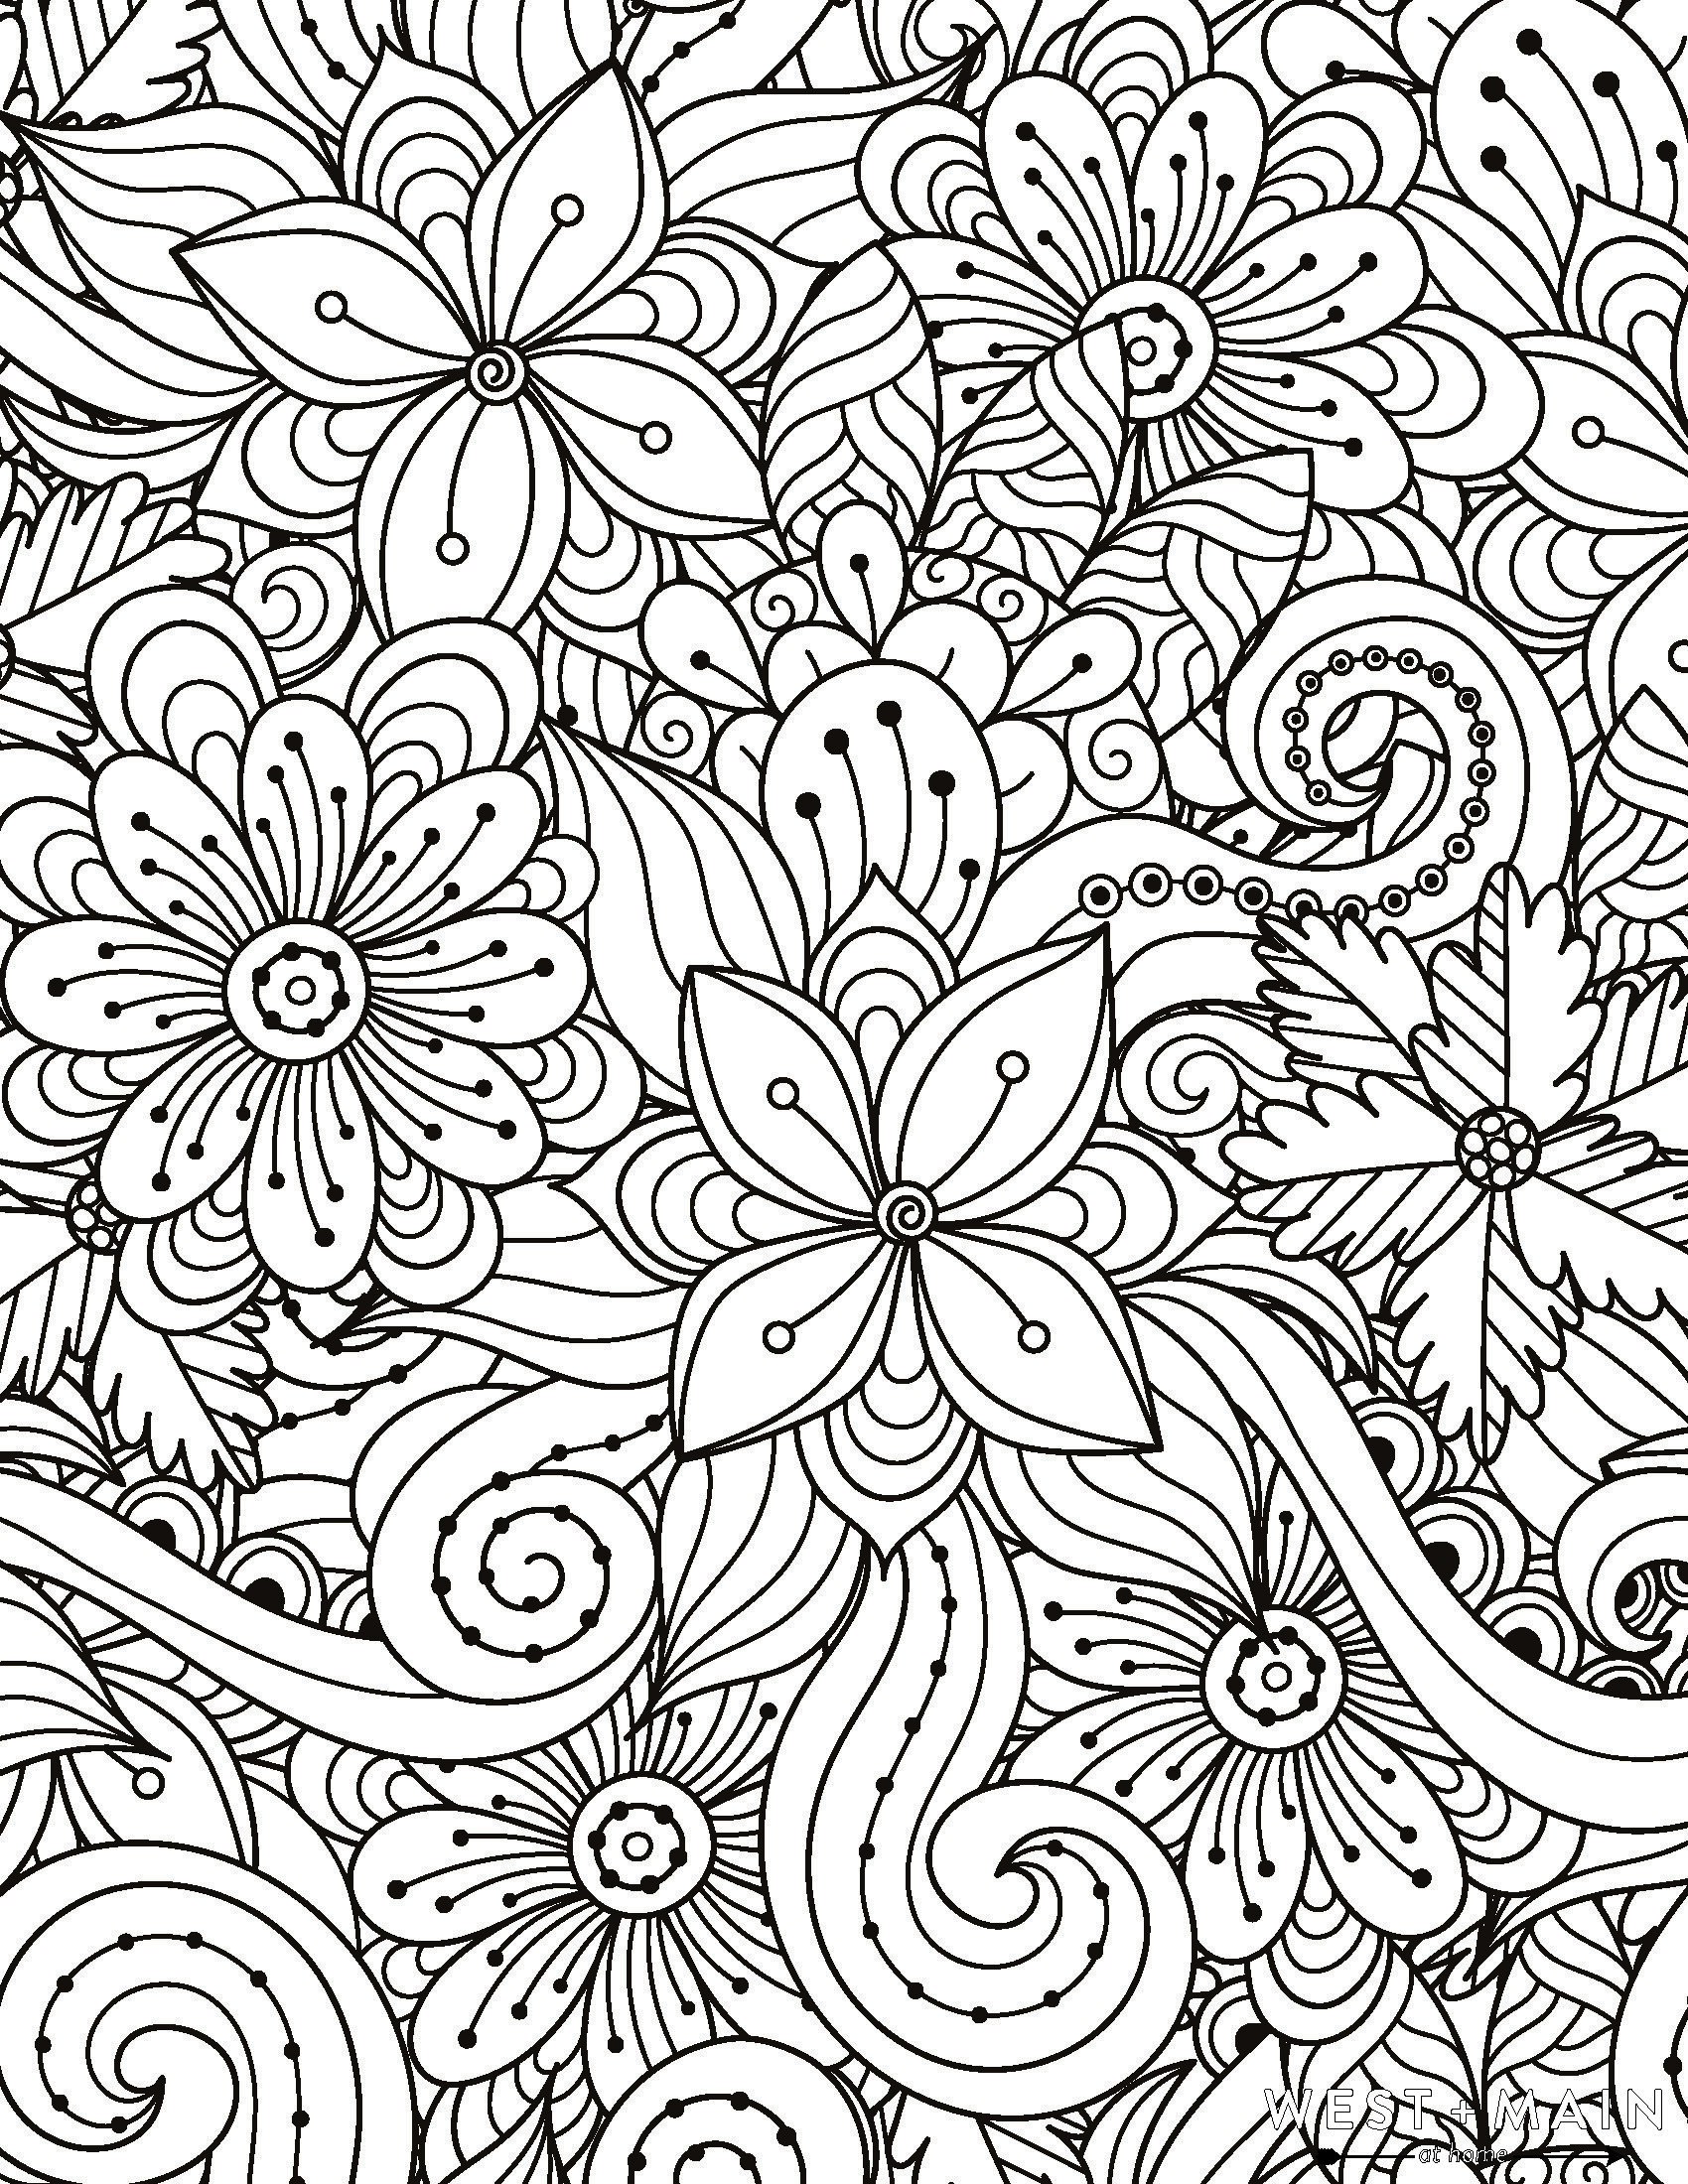 Stay Home + Color Download West + Main Coloring Sheets to Print ...